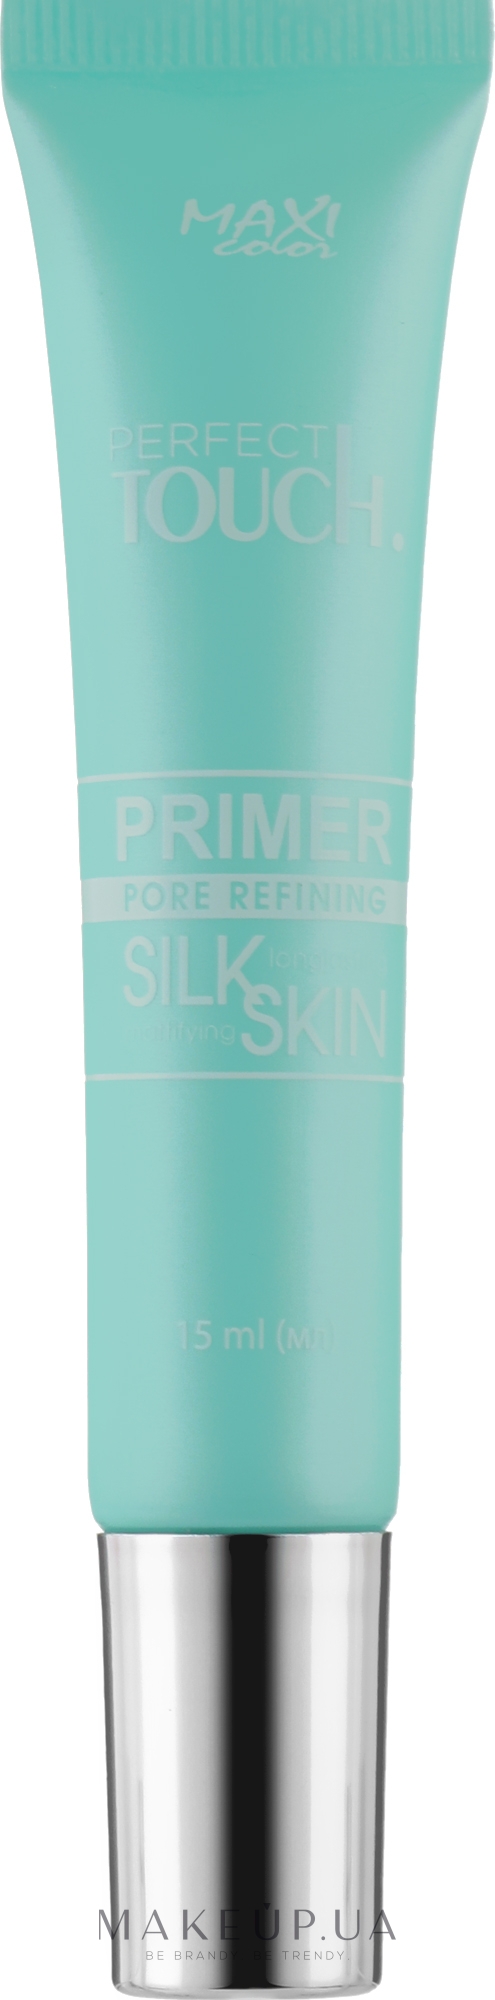 Праймер для лица - Maxi Color Perfect Touch Primer Pore Refining — фото 15ml